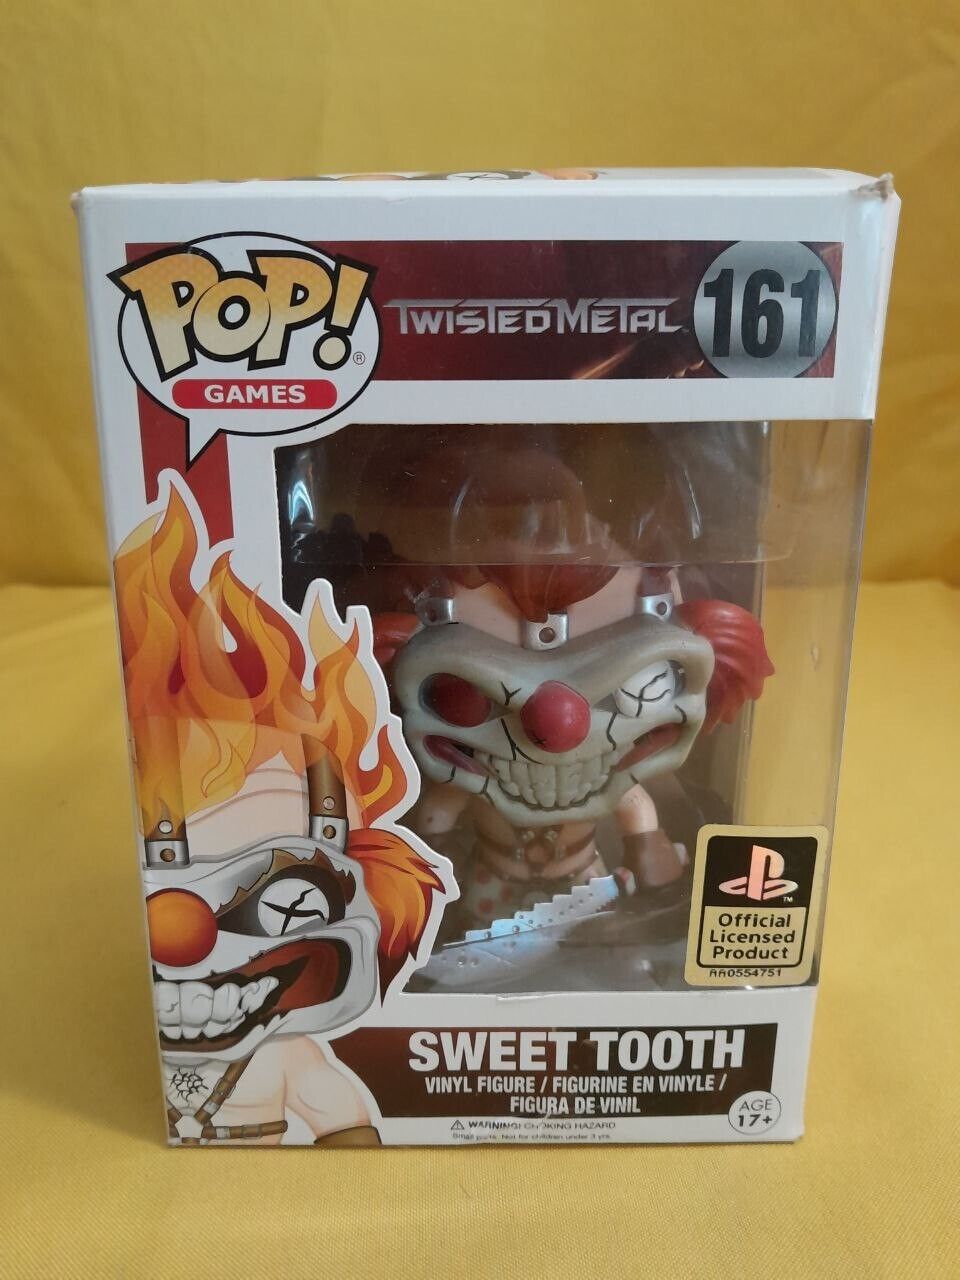 FUNKO POP SWEET TOOTH 161 TWISTED METAL PS LICENSED RARE VAULTED W/PROTECTOR P11